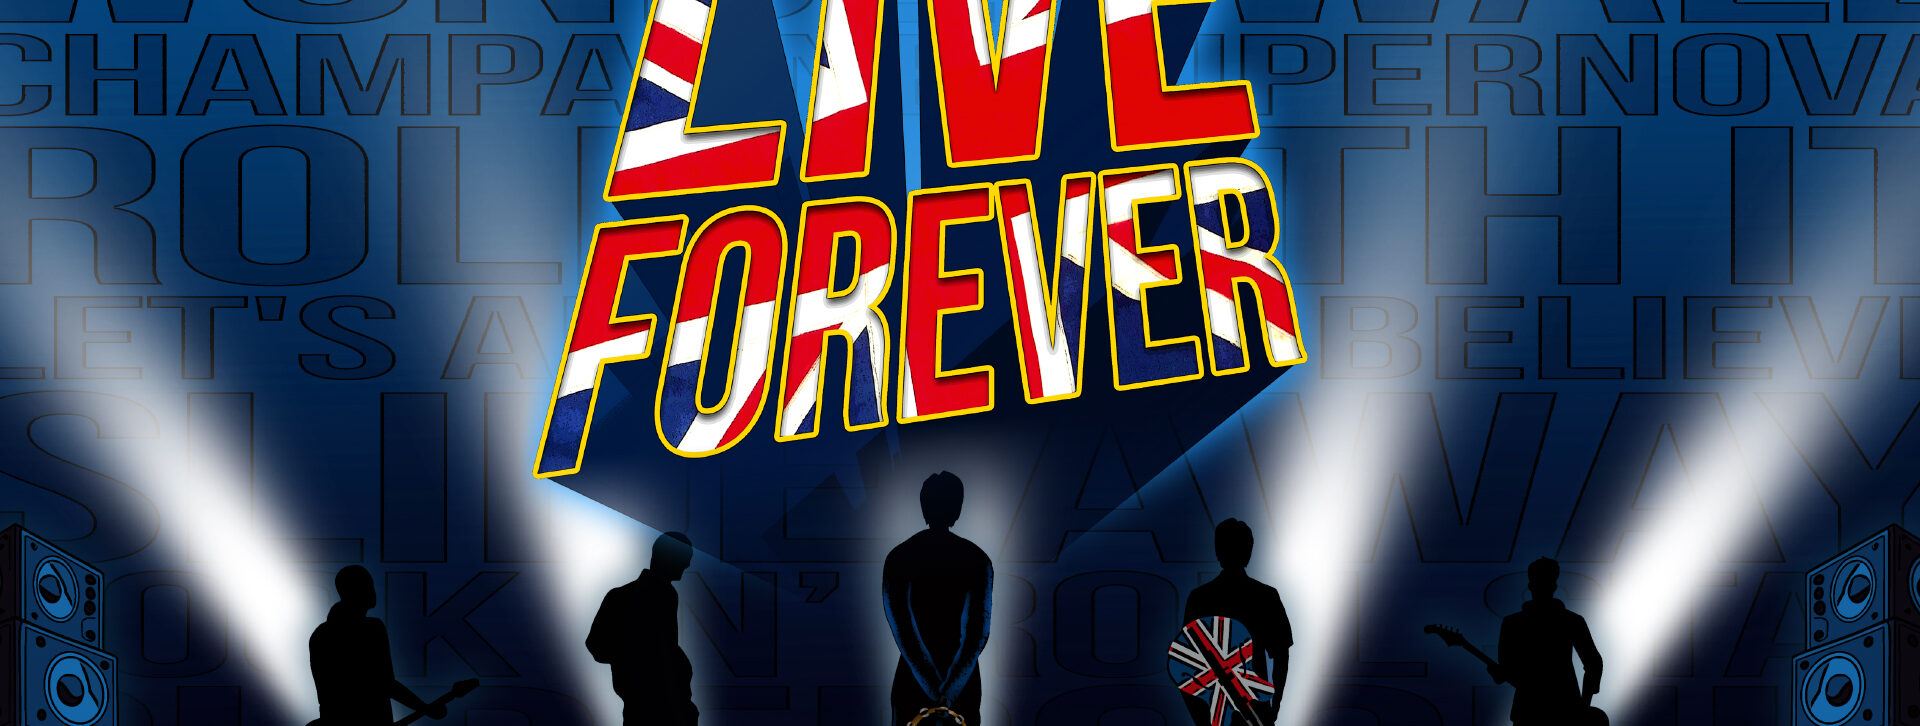 Live Forever &#8211; The Rise of Oasis